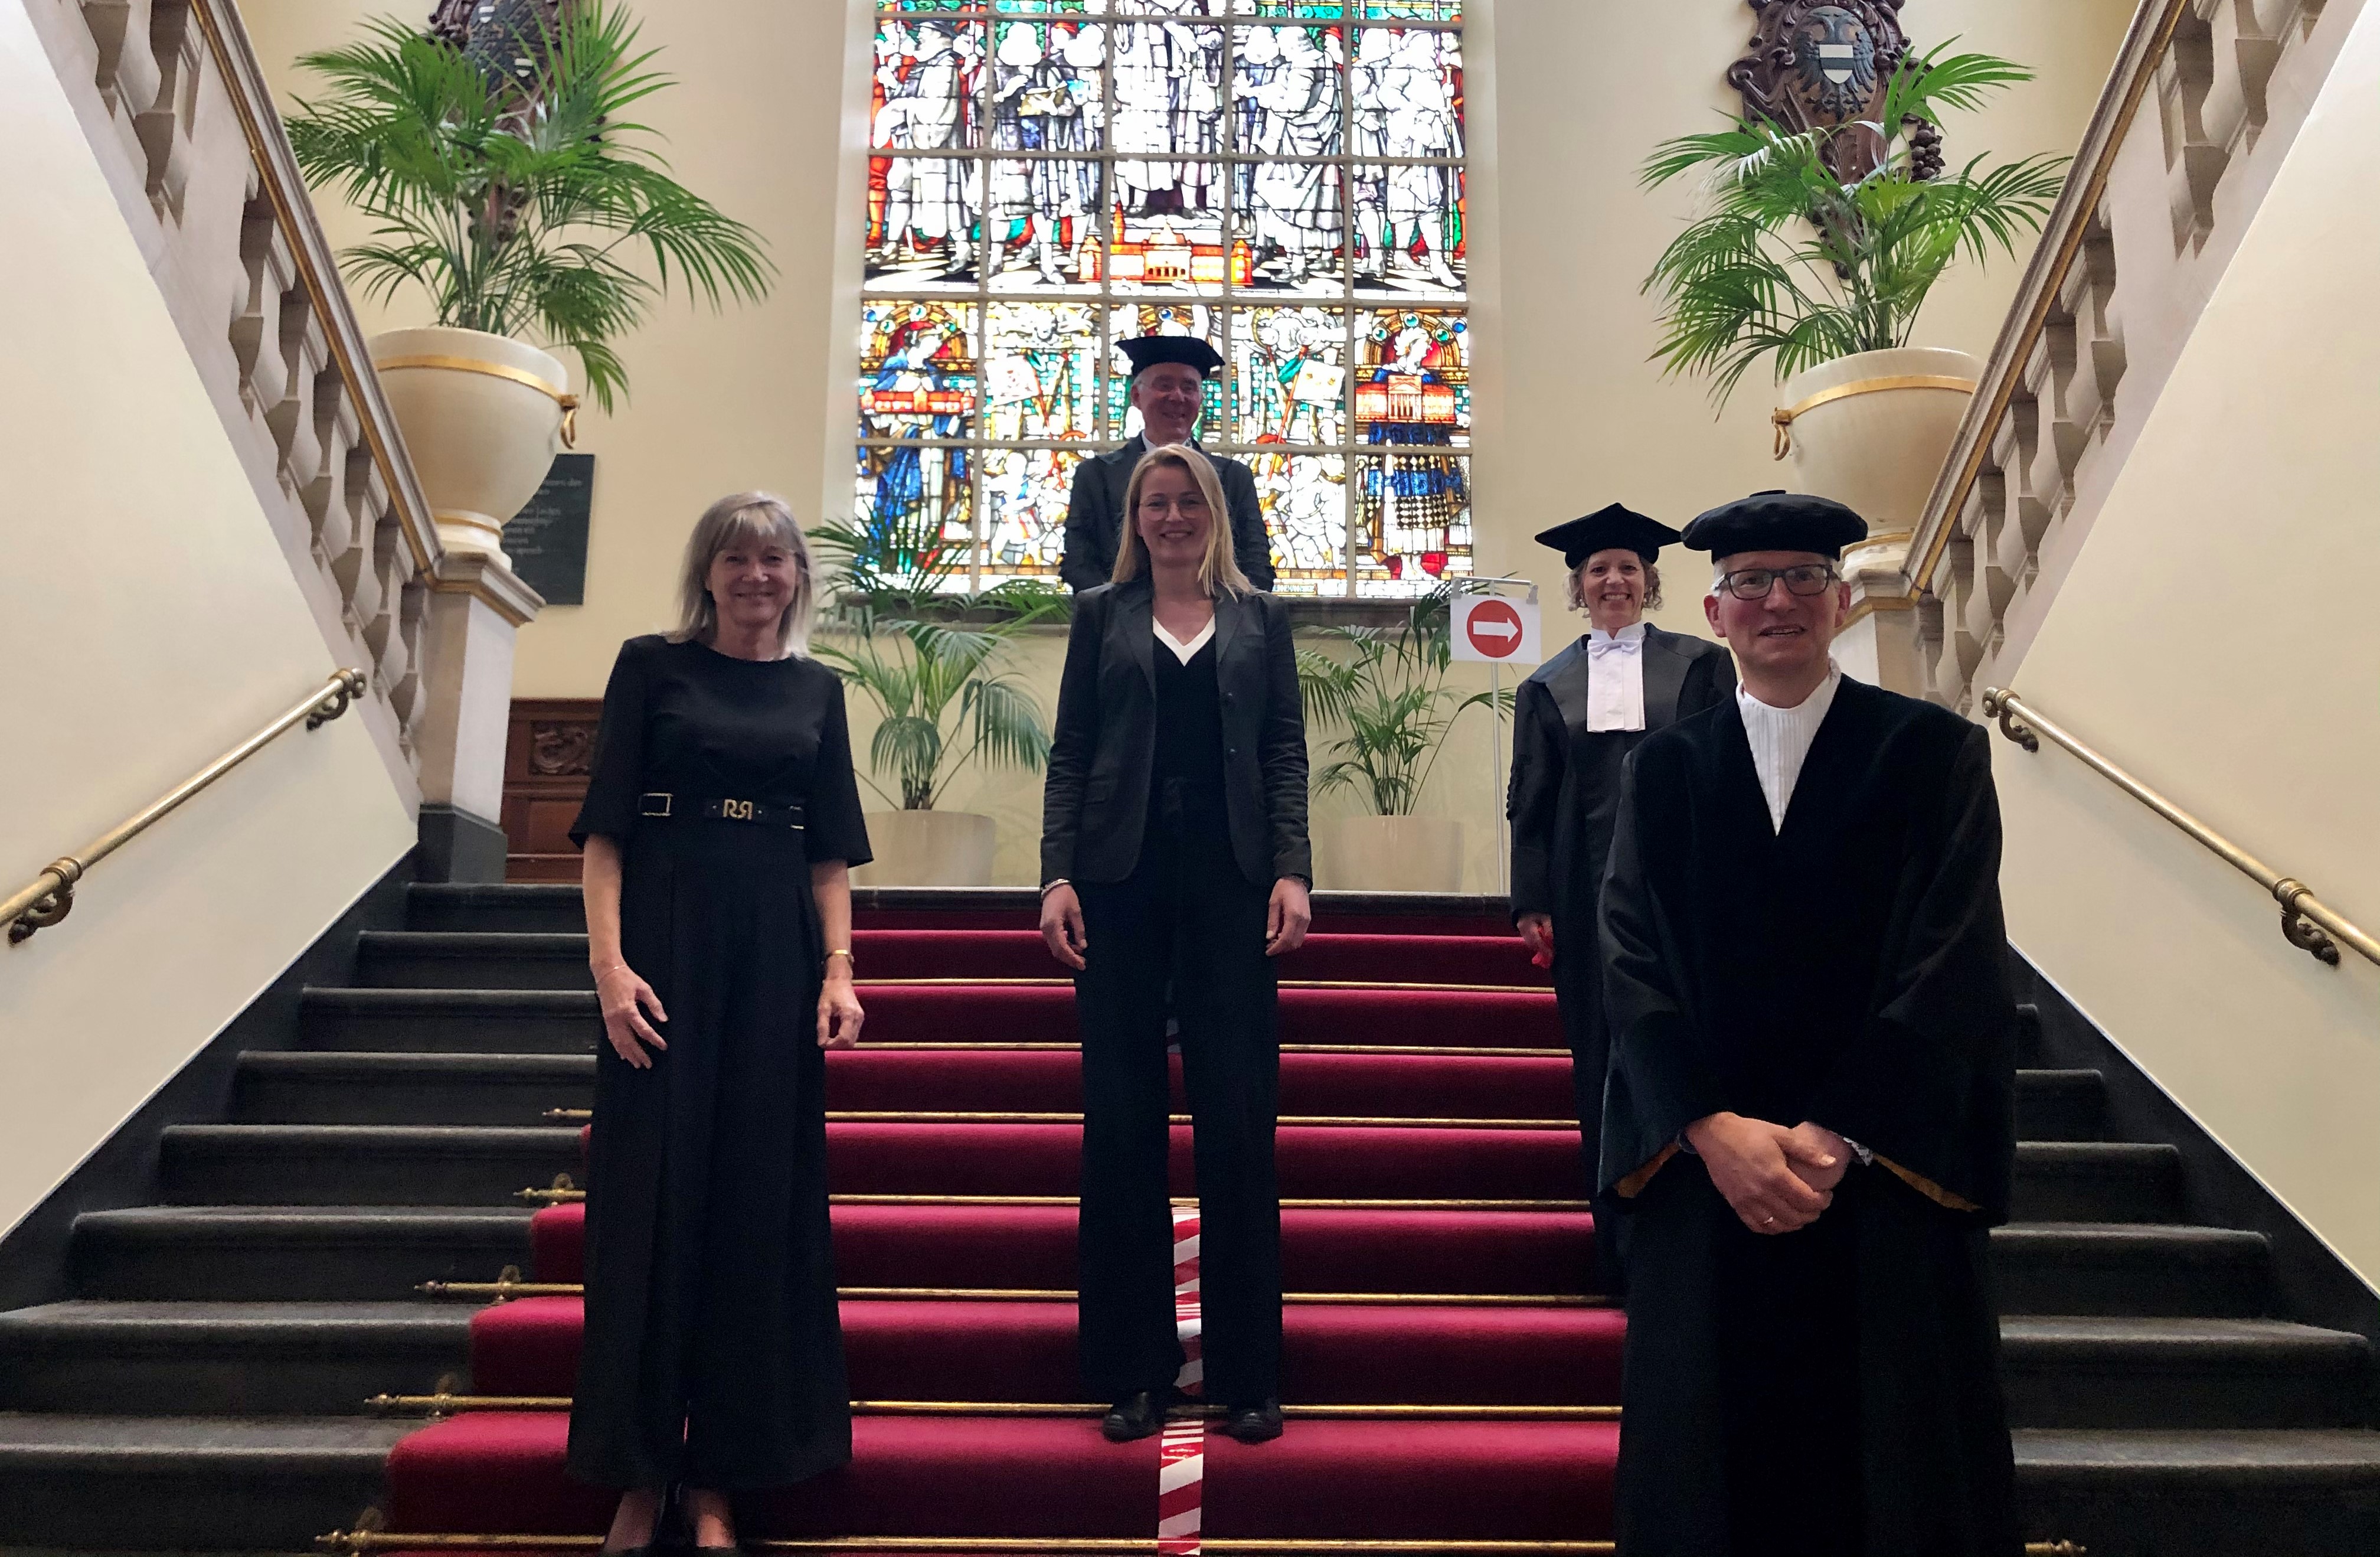 Frontrow: Janny Hoekstra (left), Bianca Harms (center) and Tammo Bijmolt (left) at Harms' PhD ceremony in 2021